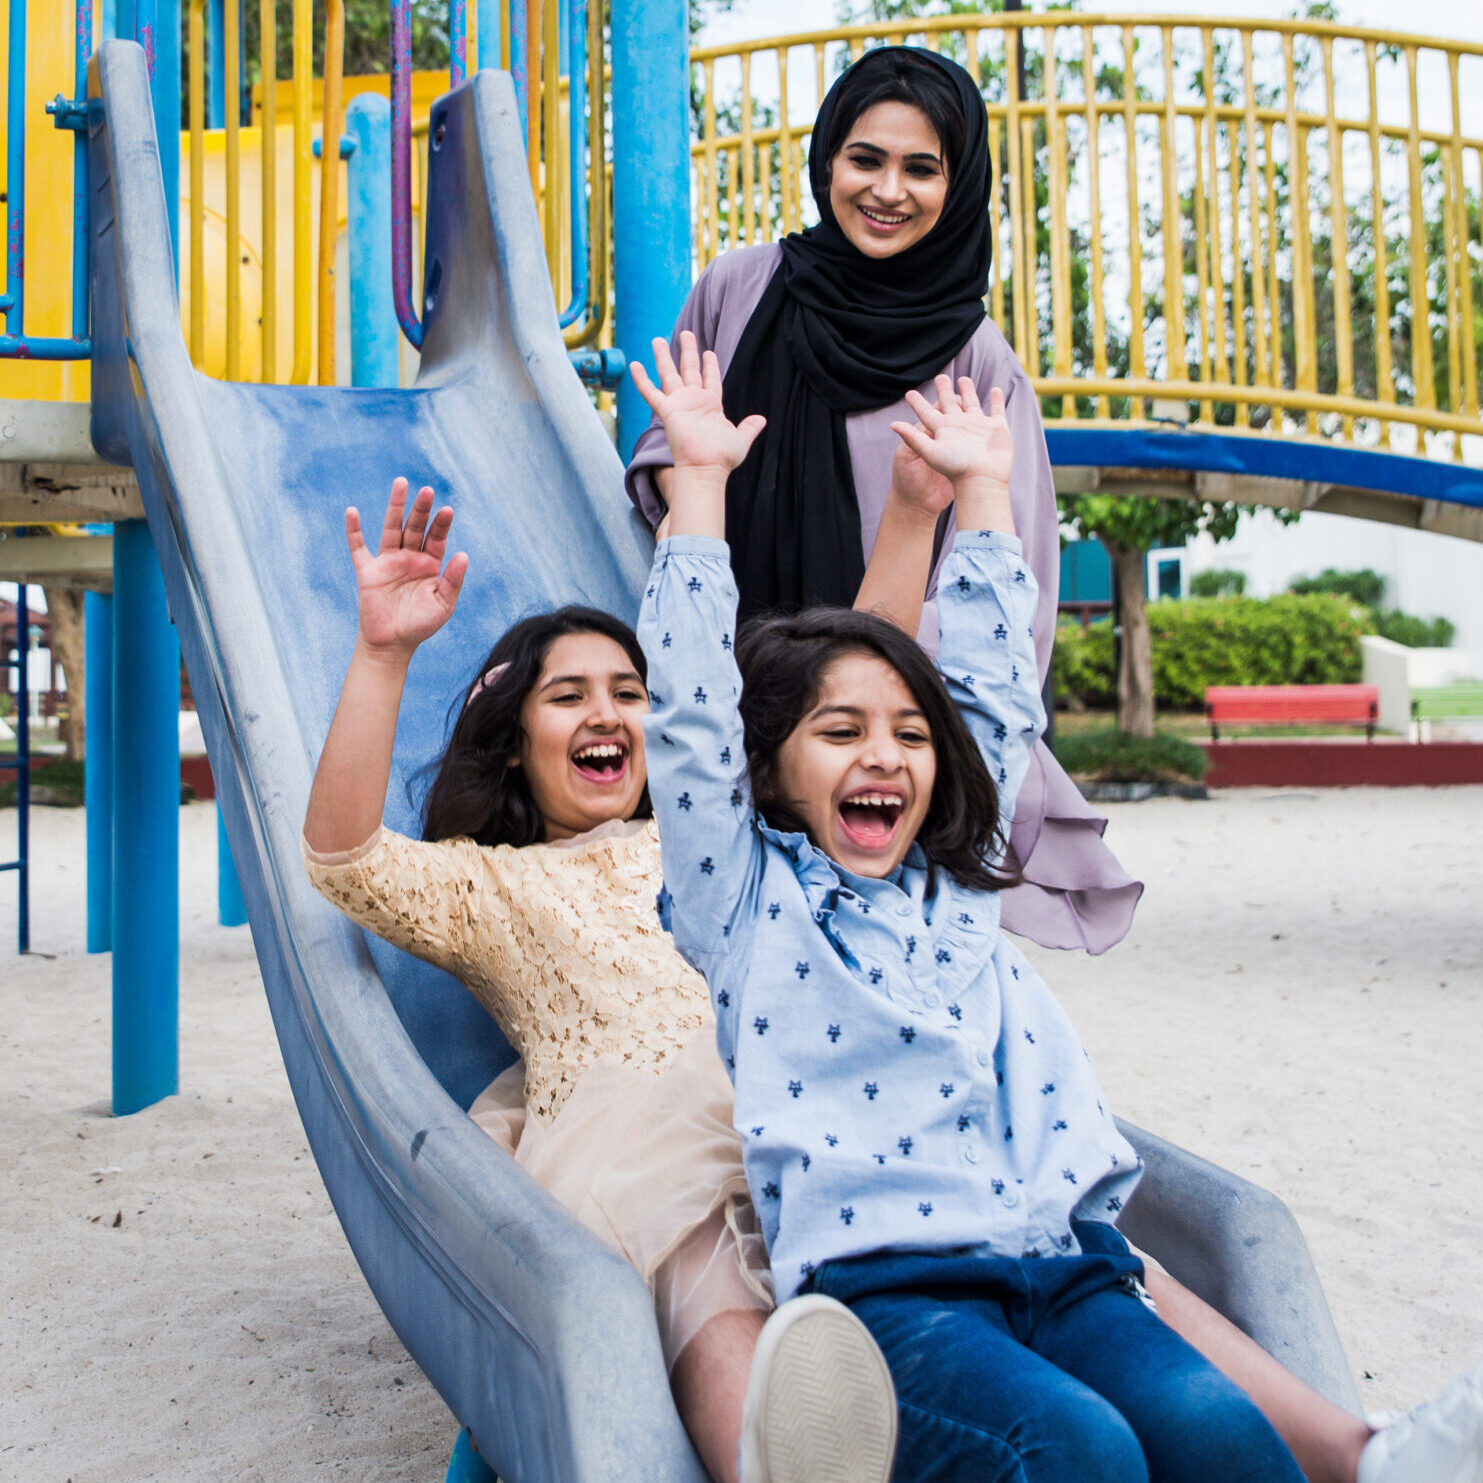 Mom and daughters spending time together at the park, in Dubai